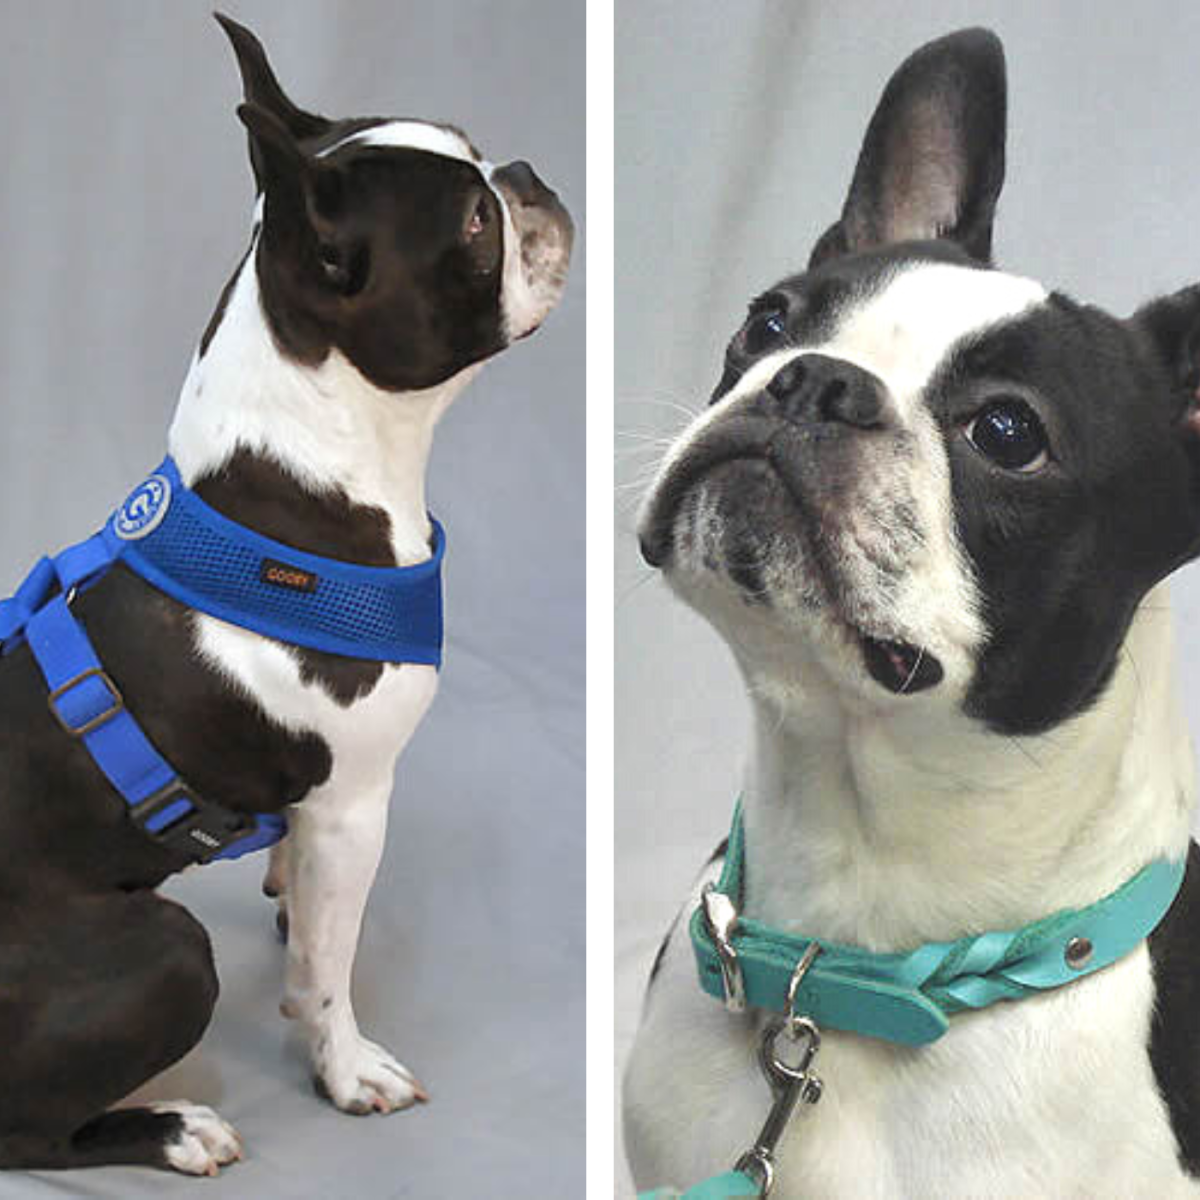 Booker (Boston Terrier) looks cute in either a dog collar or harness. But which is better for him?